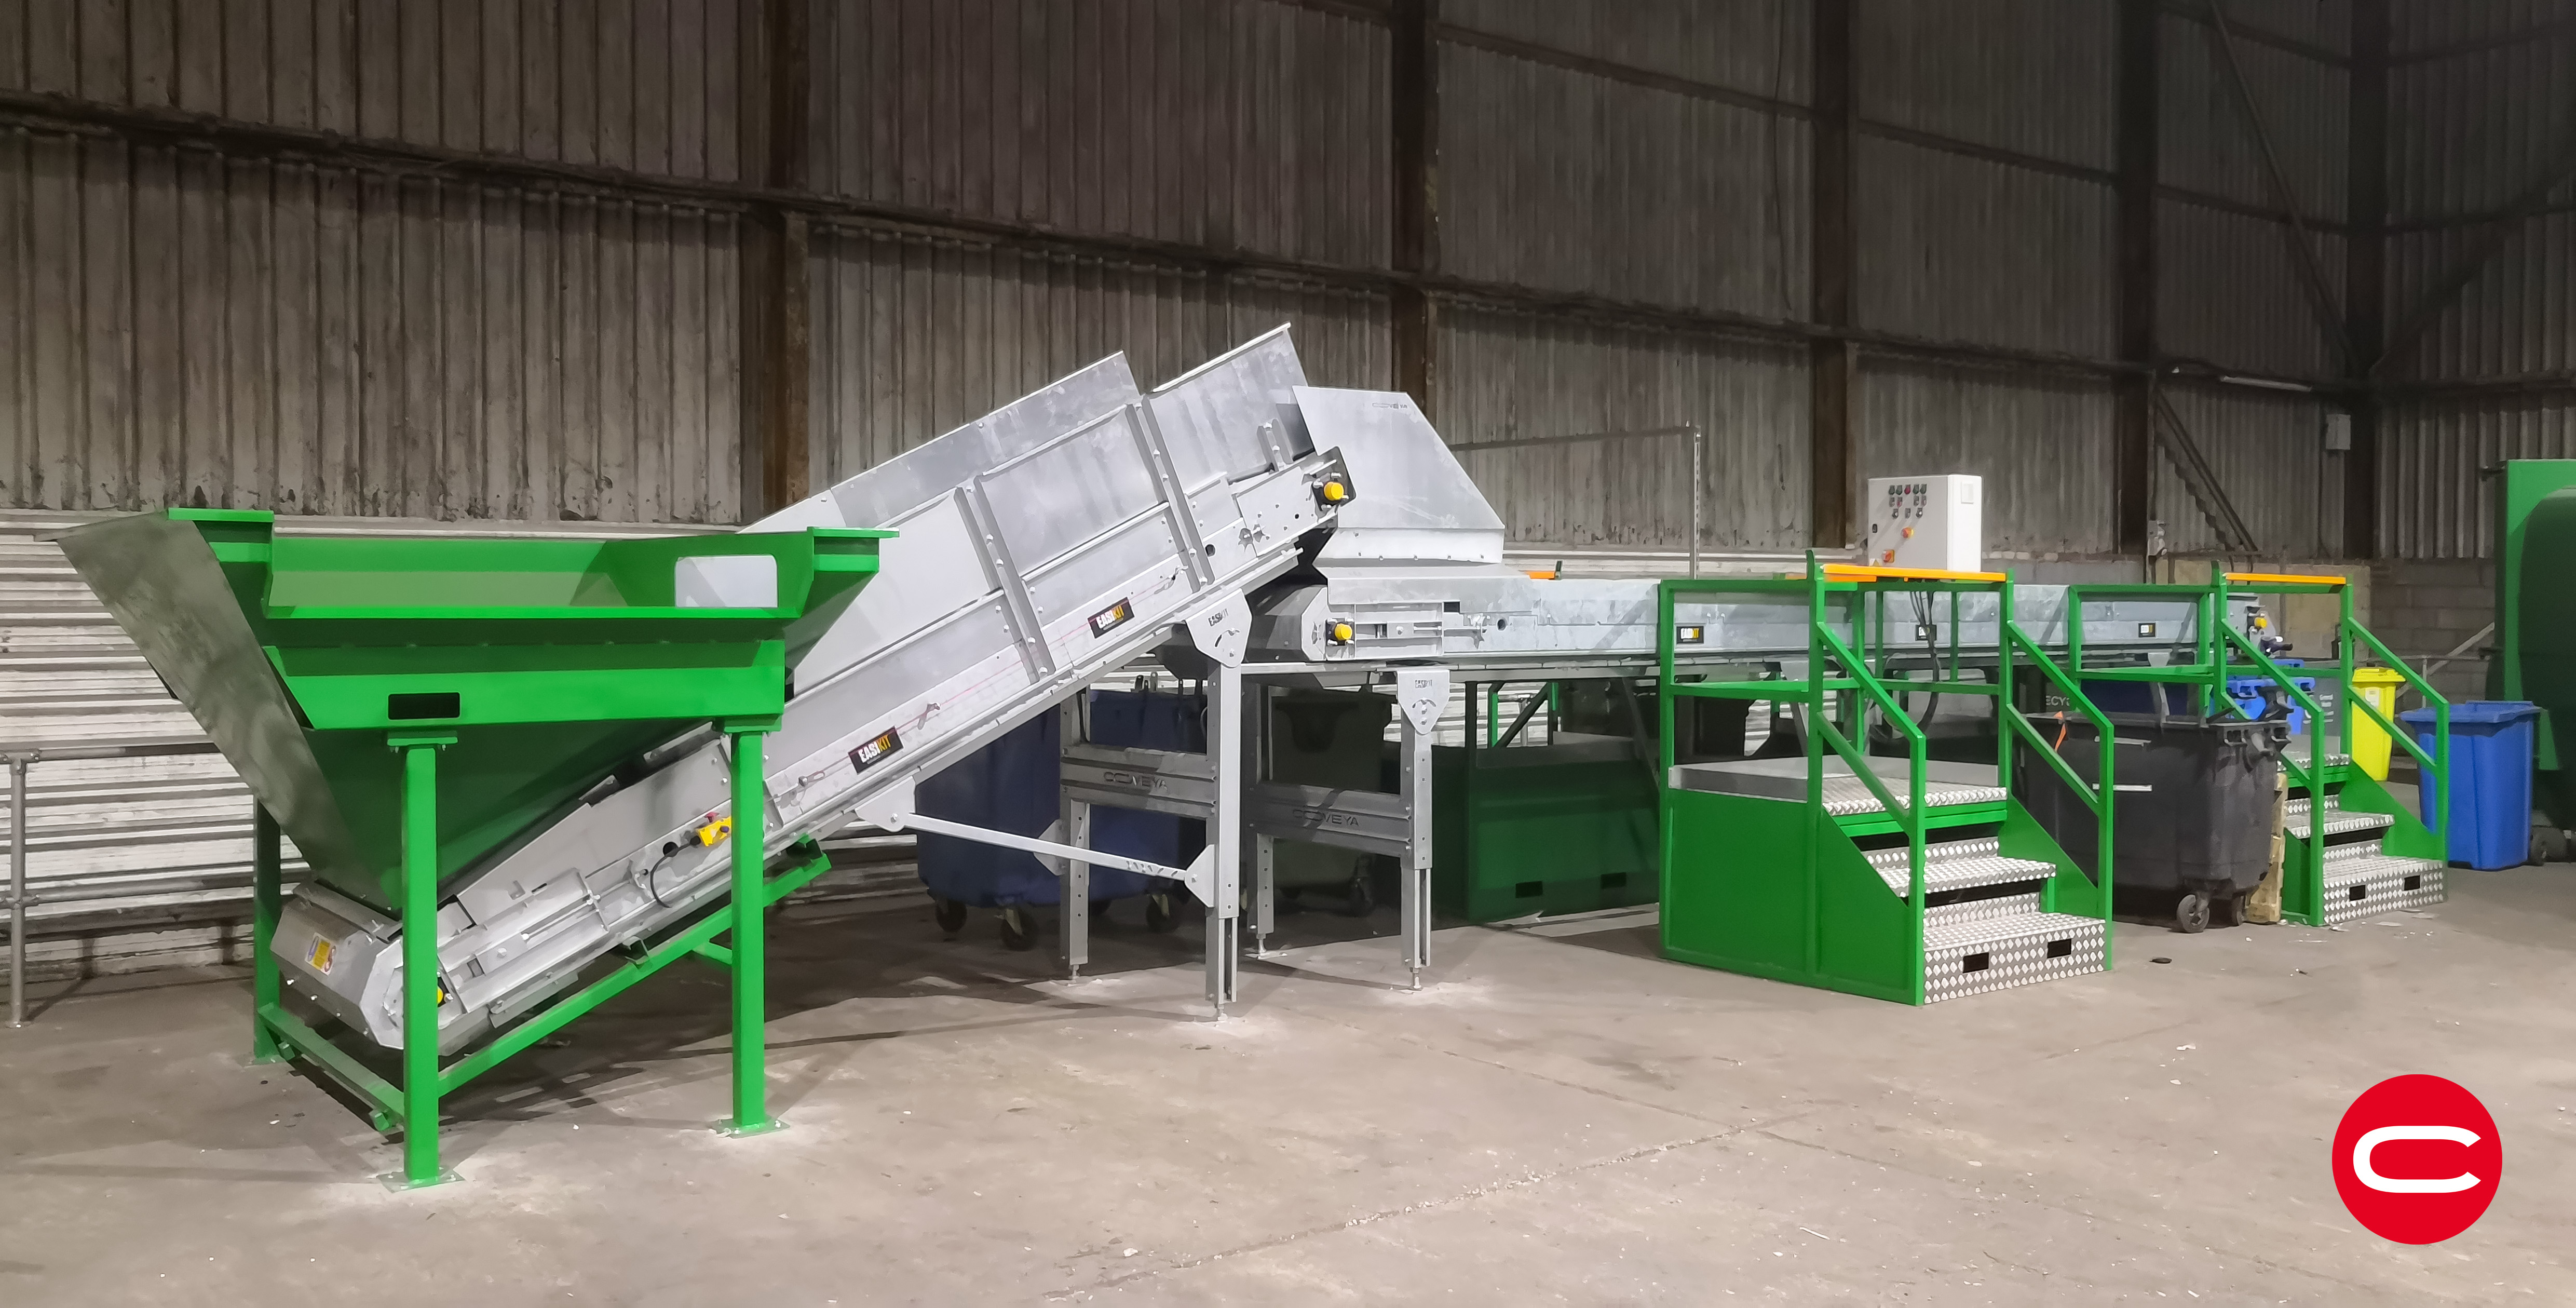 Paper Round waste and recycling facility [Bespoke picking station]